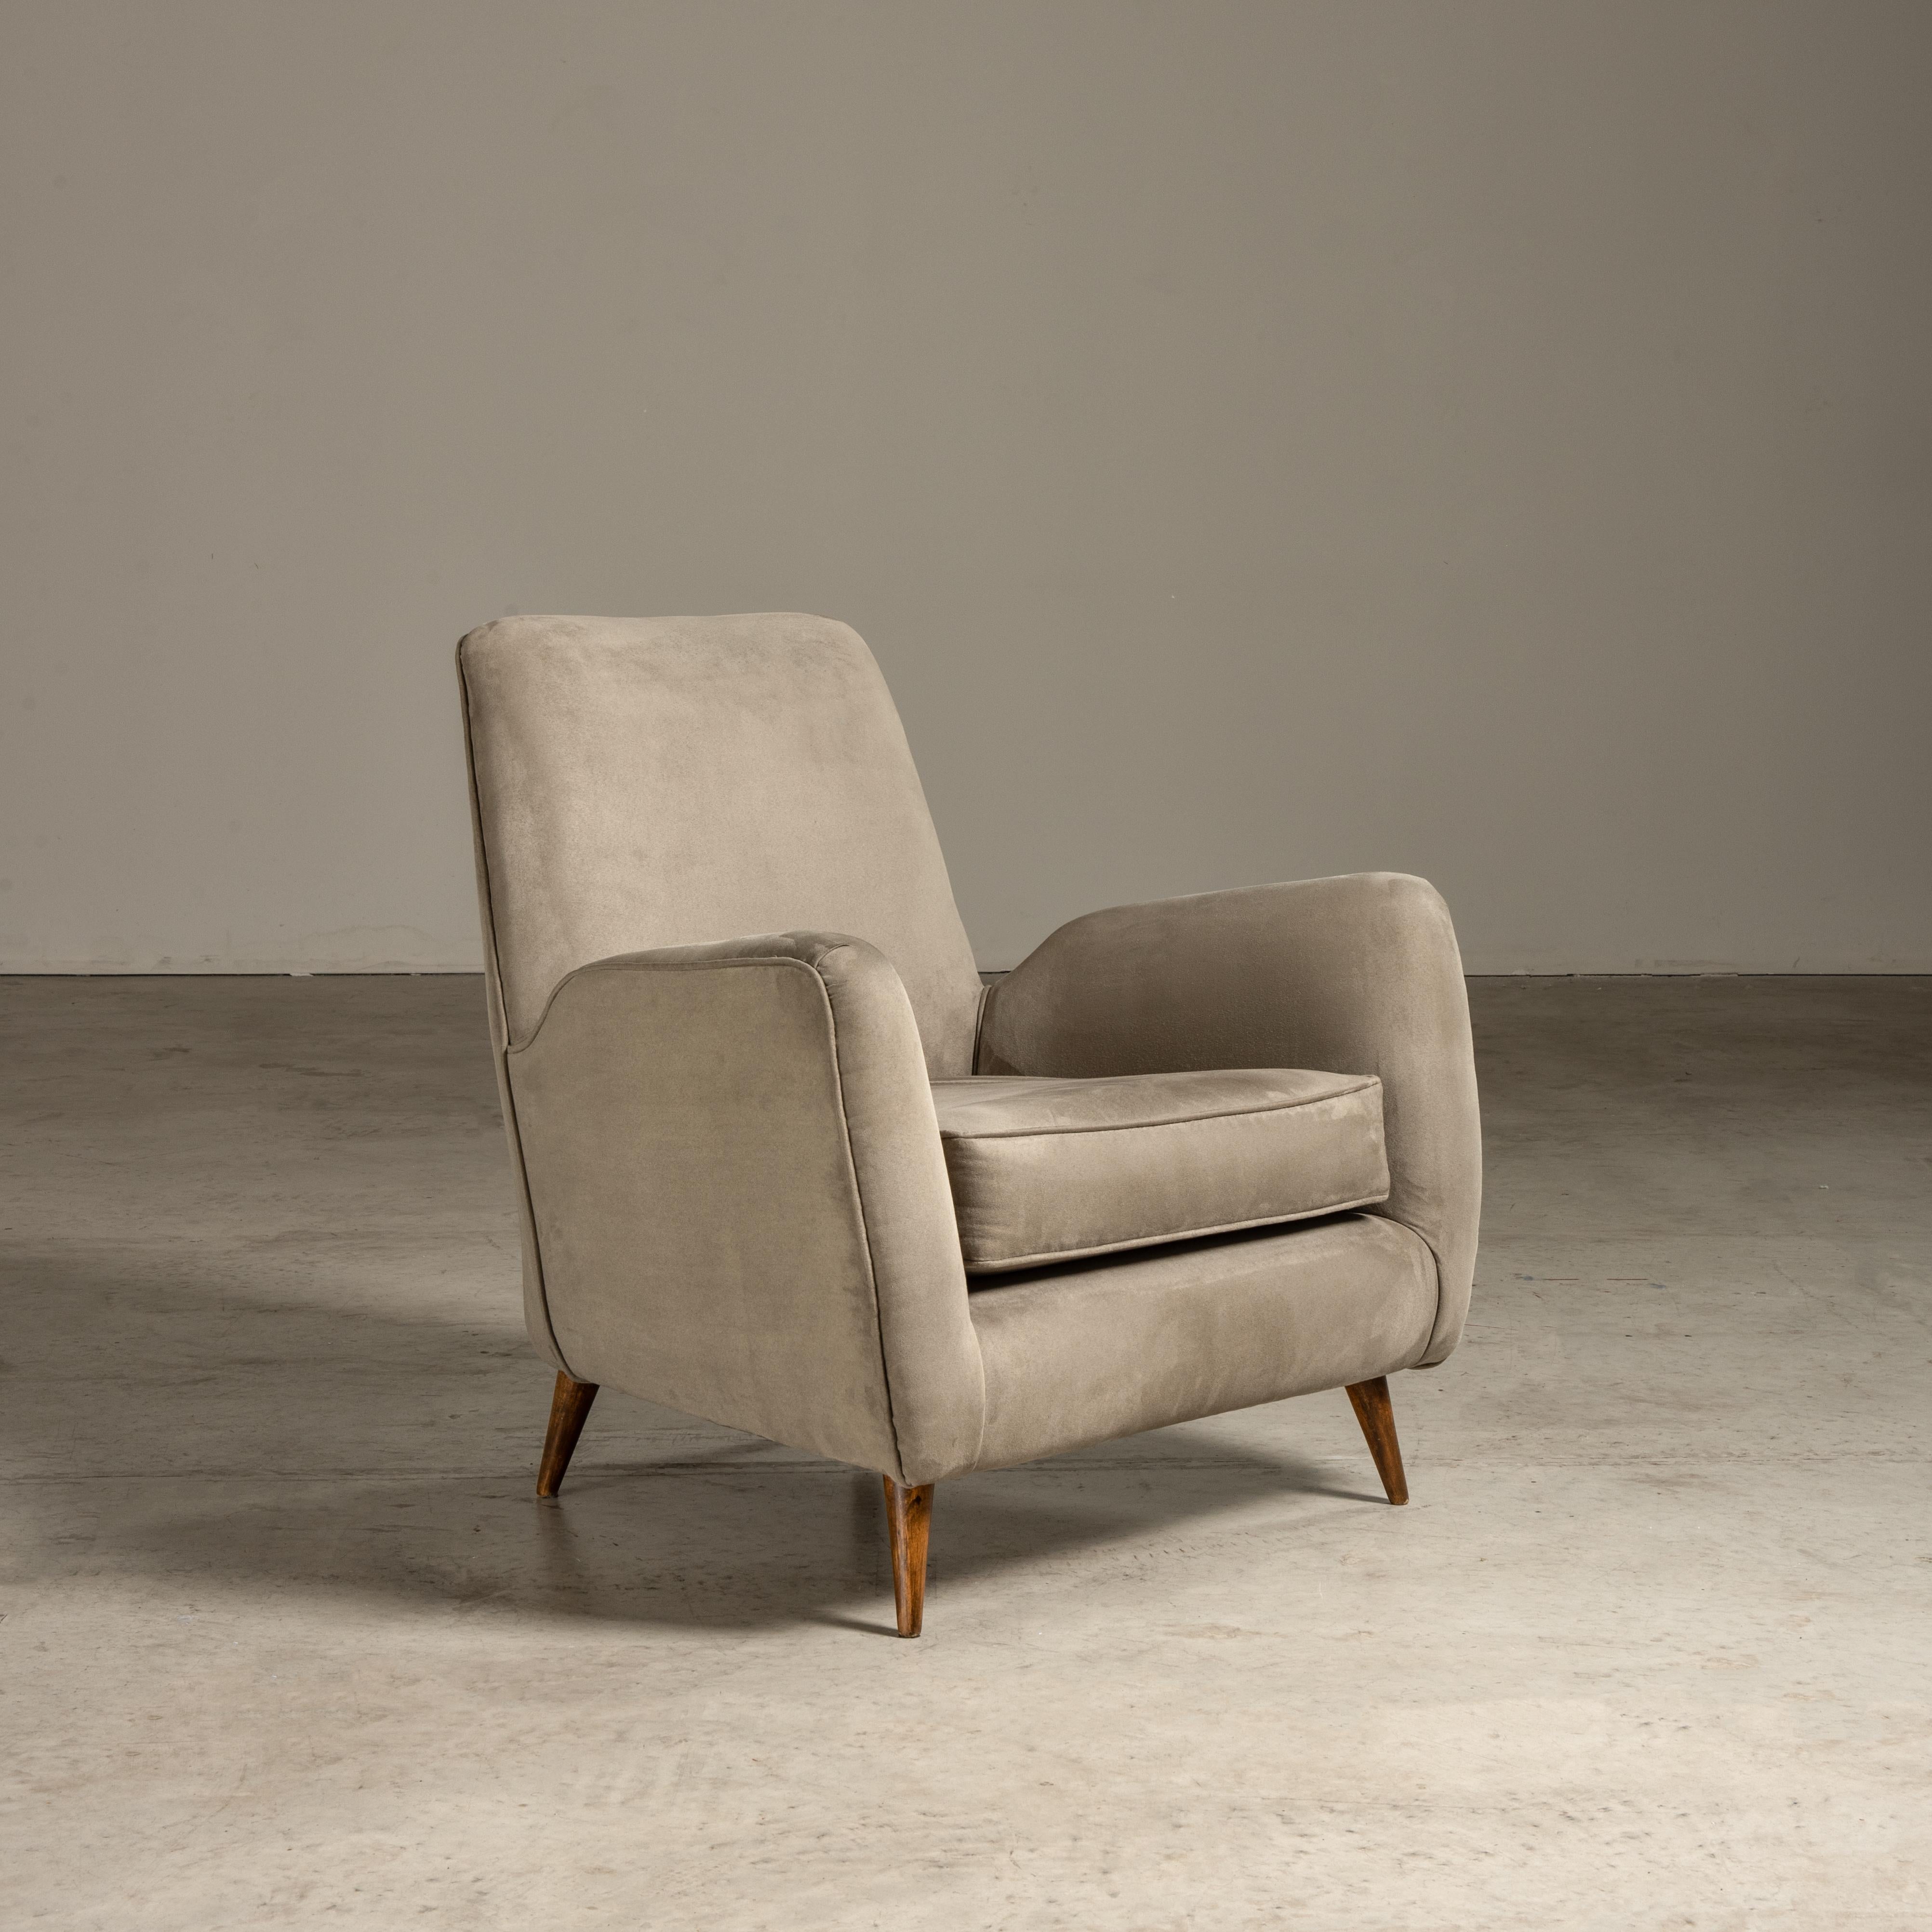 This elegant lounge chair, designed by Giuseppe Scapinelli, is an exquisite piece of modern furniture from the mid-20th century, showcasing the elegant intersection of fabric and wood. This armchair exemplifies Scapinelli's design ethos, which